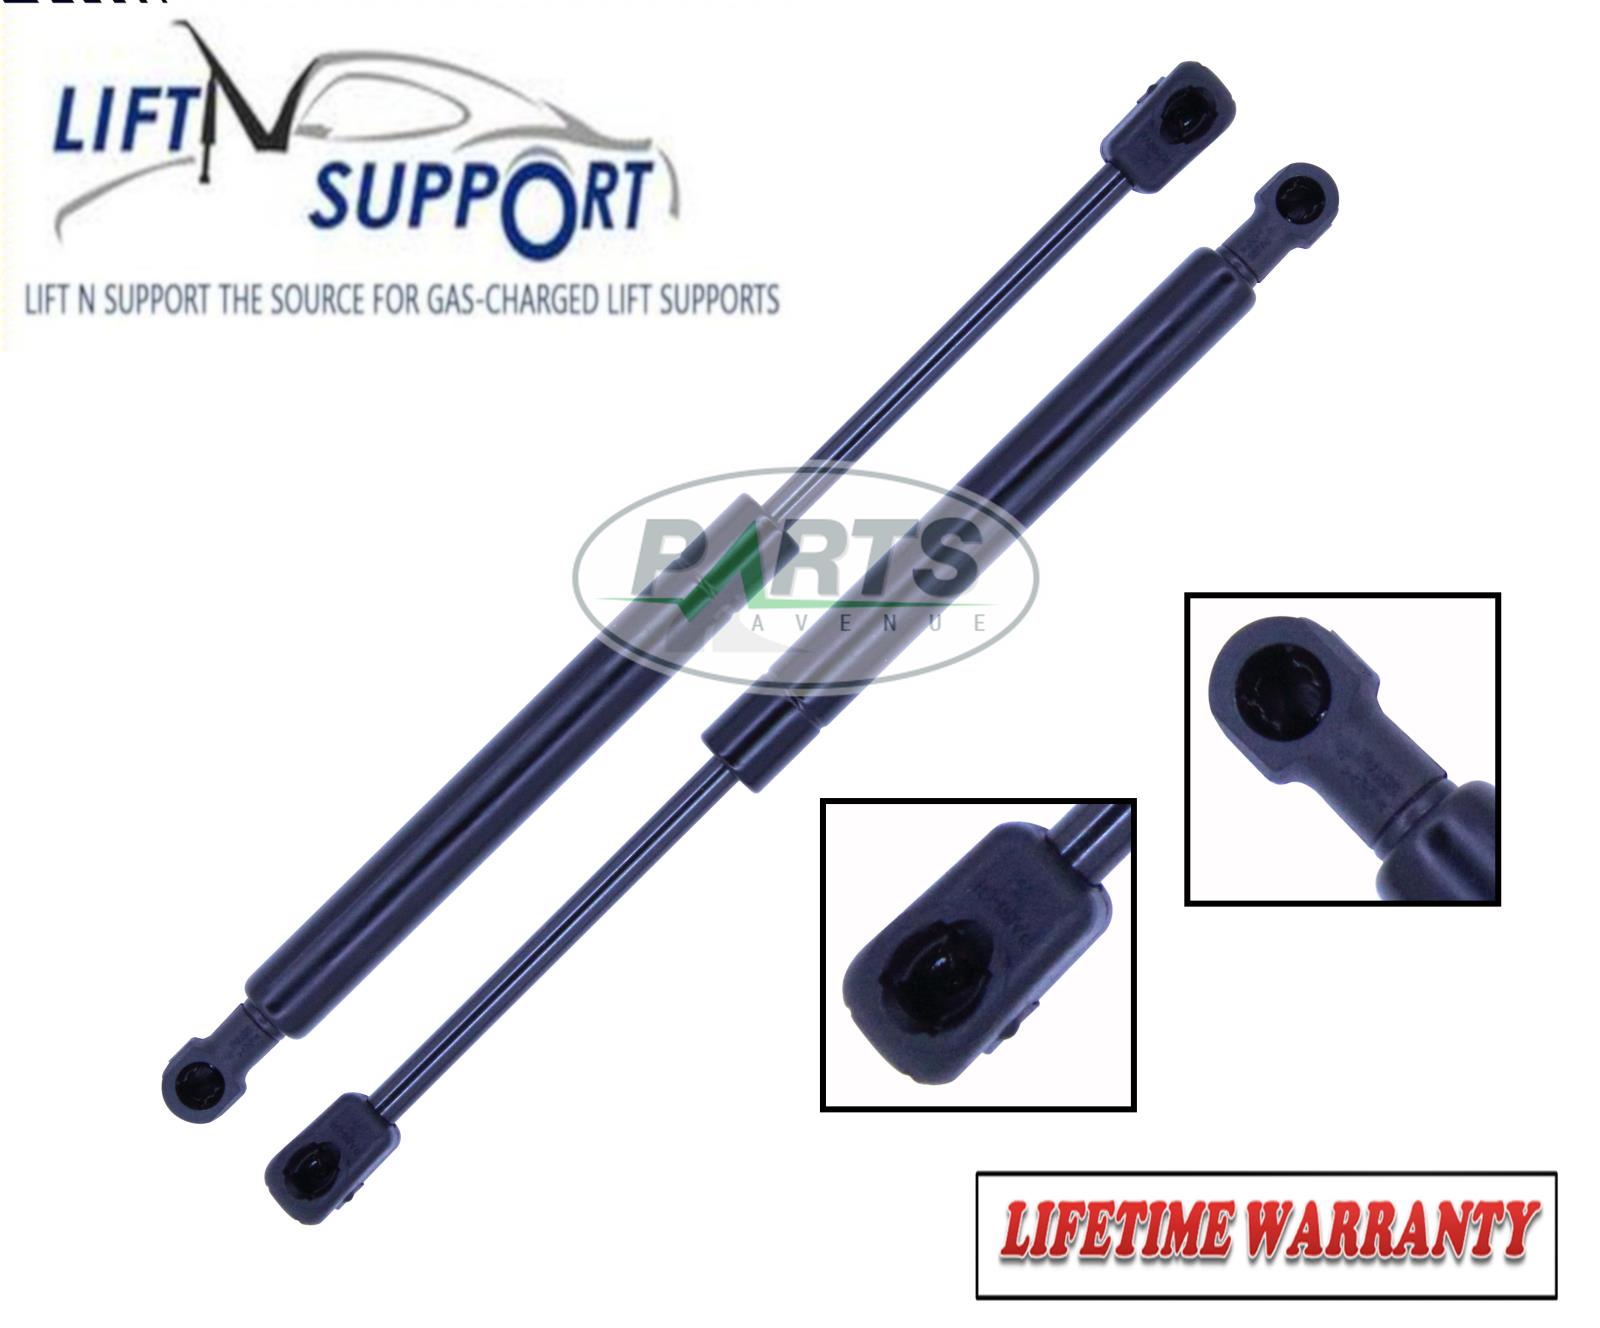 2pcs Rear Trunk Lid Lift Supports Shocks Gas Spings Struts 6405 for 2005-2008 Chrysler 300 300C